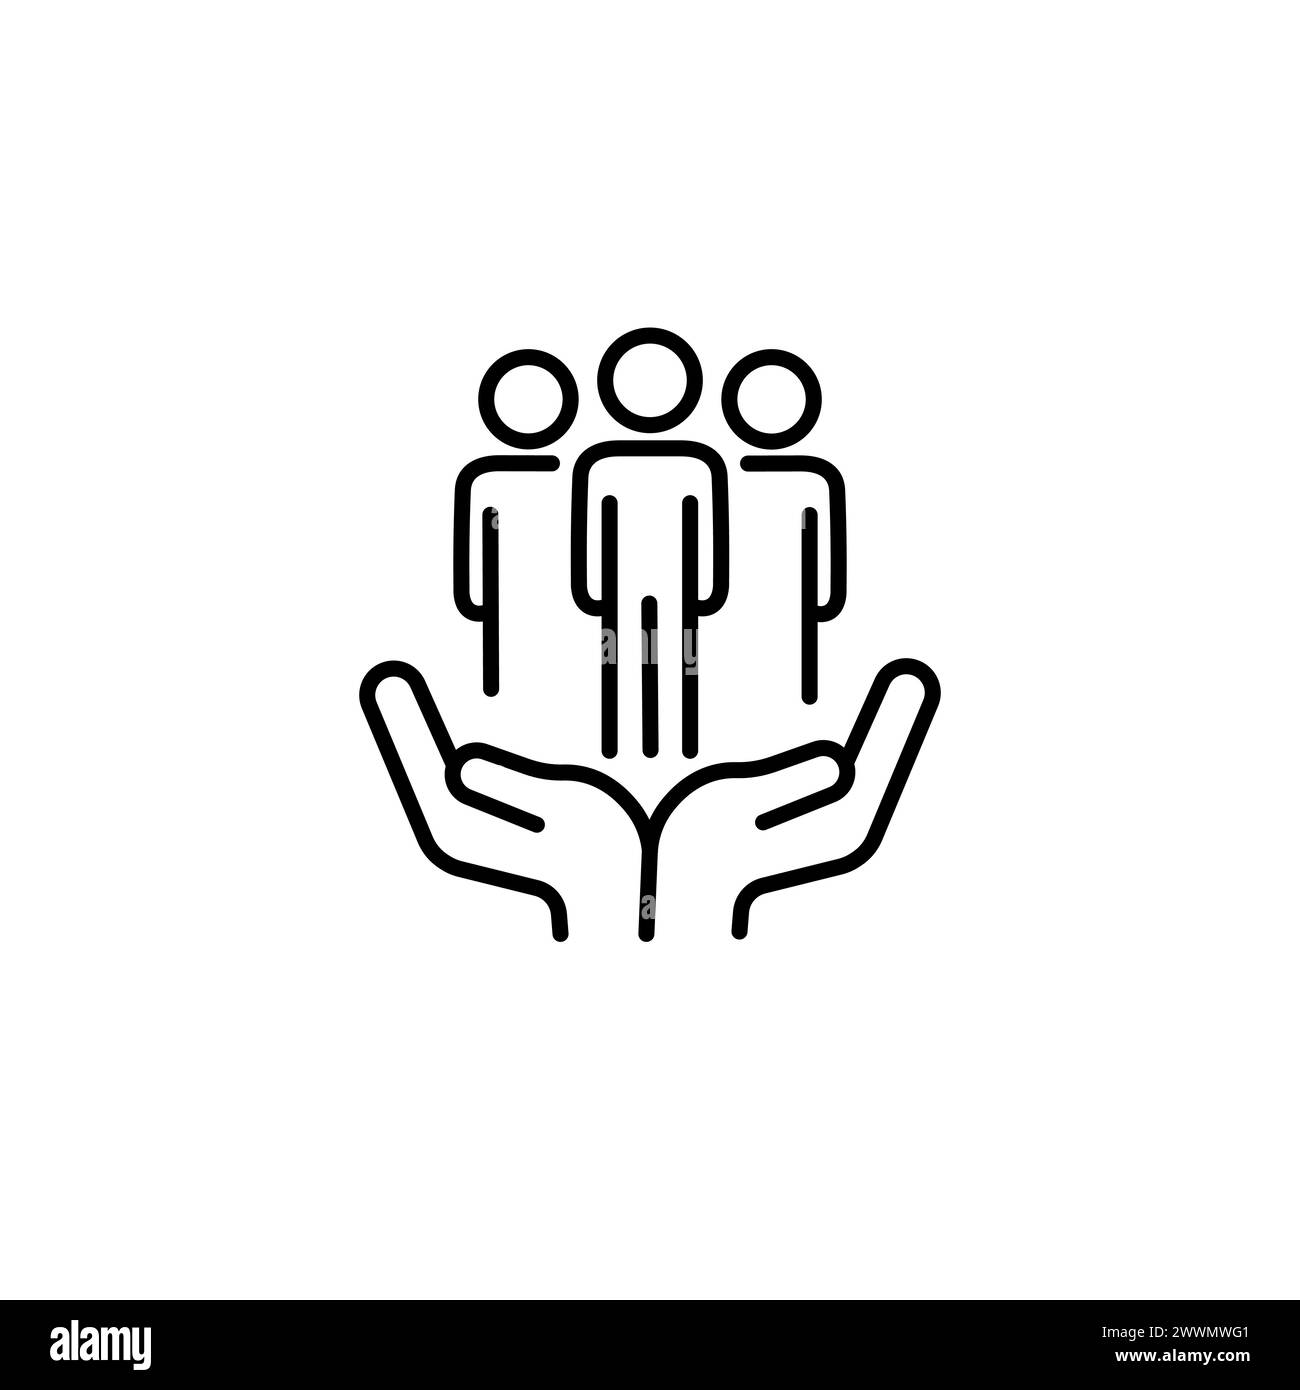 Inclusion social equity icon, help or support employee, gender equality, community care, age and culture diversity, people group save, thin line symbo Stock Vector